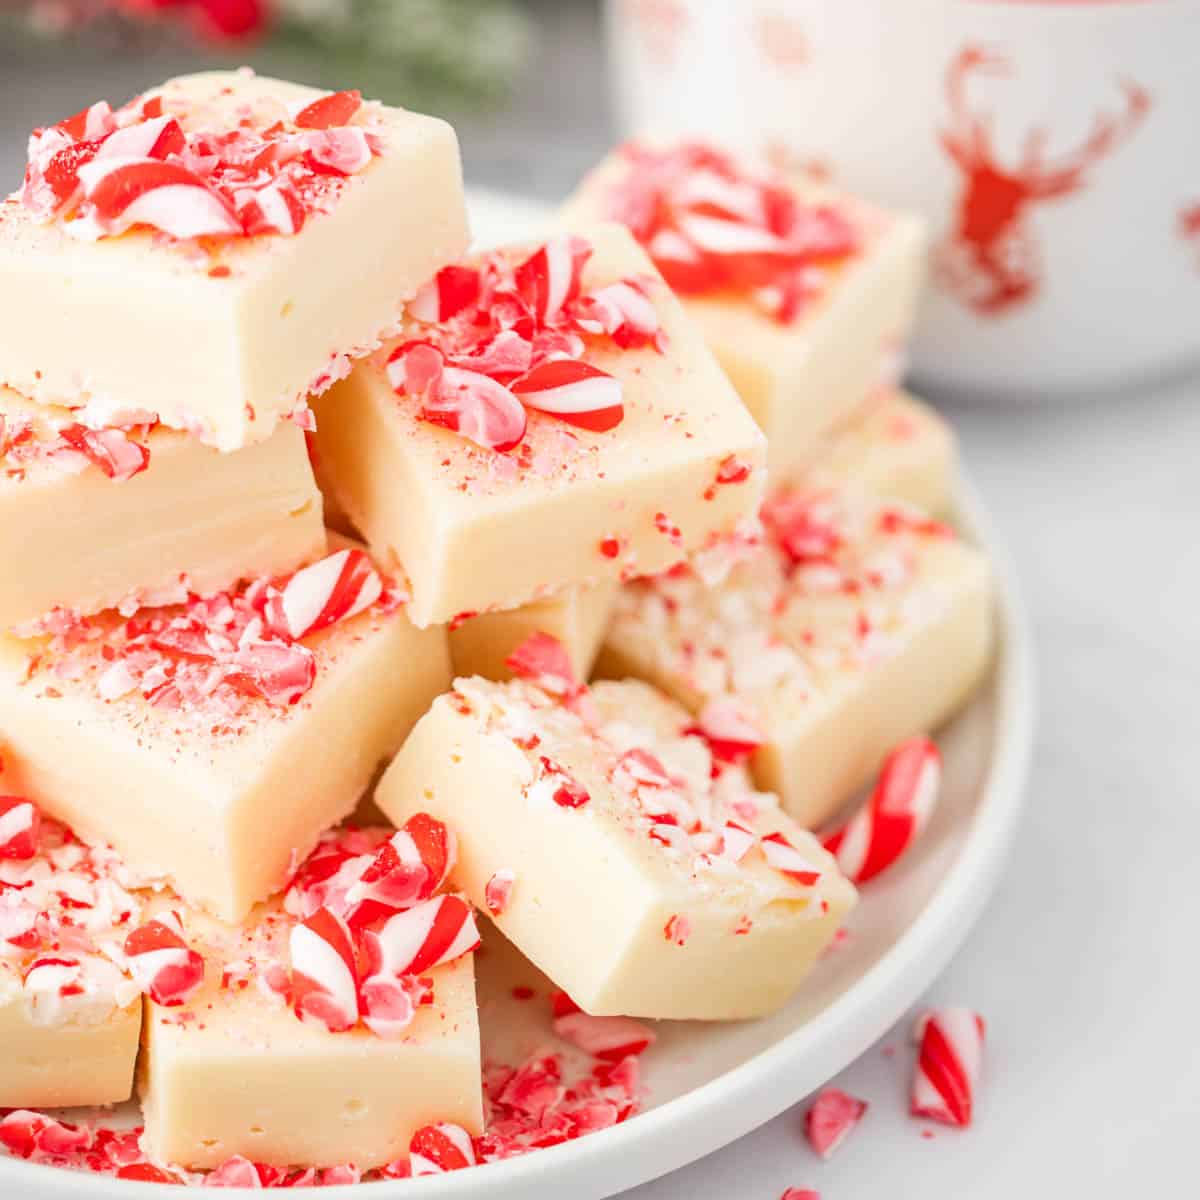 A white plate filled with cut peppermint fudge and scattered candy canes.